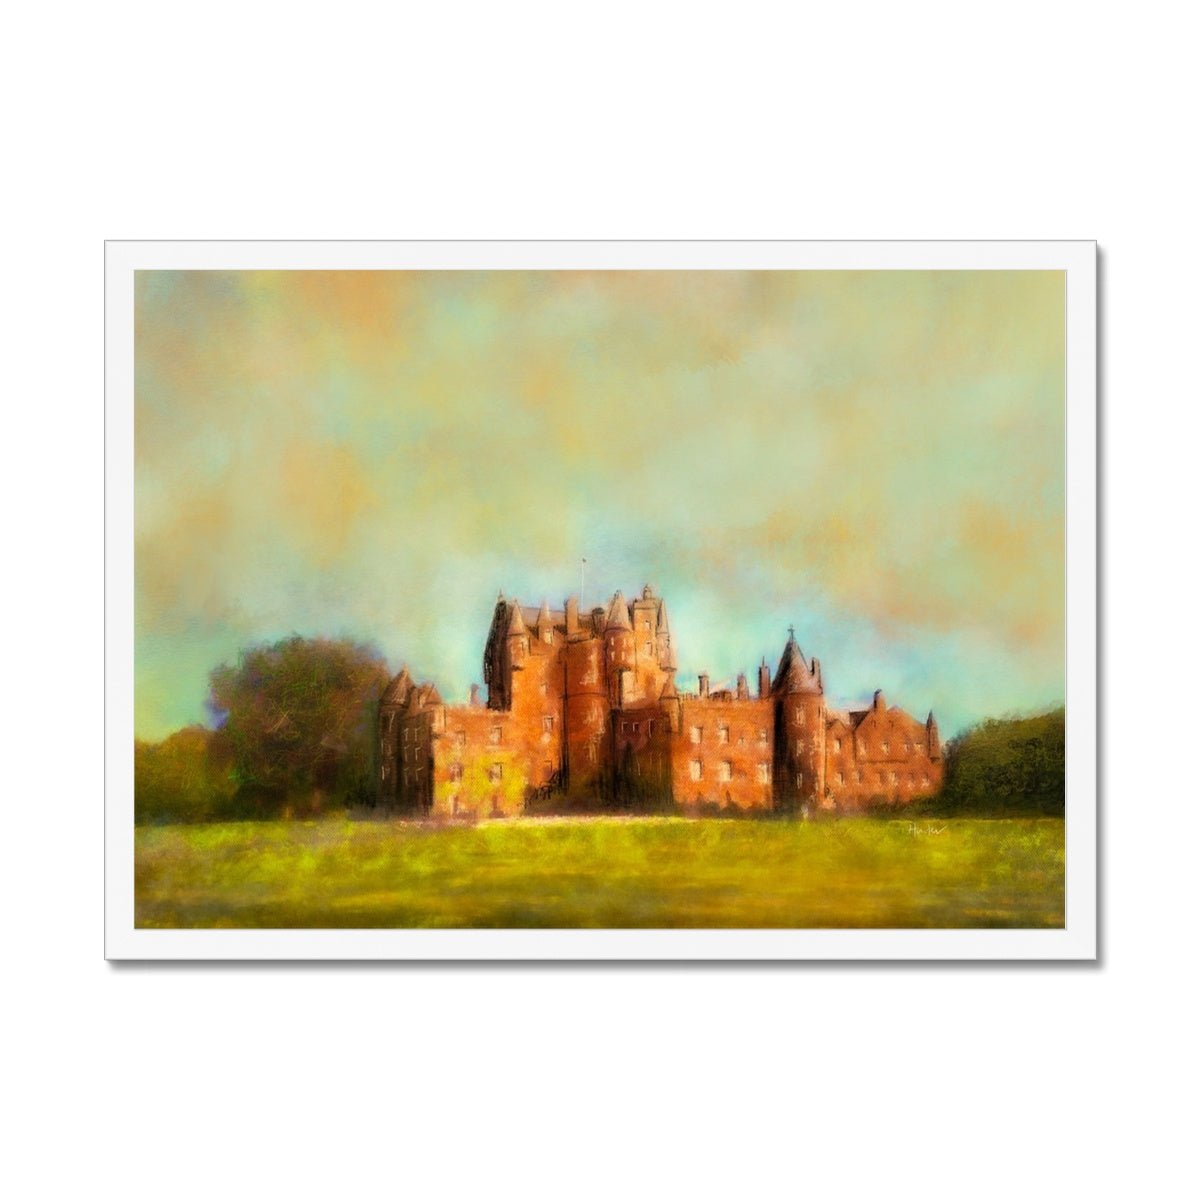 Glamis Castle Painting | Framed Prints From Scotland-Framed Prints-Scottish Castles Art Gallery-A2 Landscape-White Frame-Paintings, Prints, Homeware, Art Gifts From Scotland By Scottish Artist Kevin Hunter